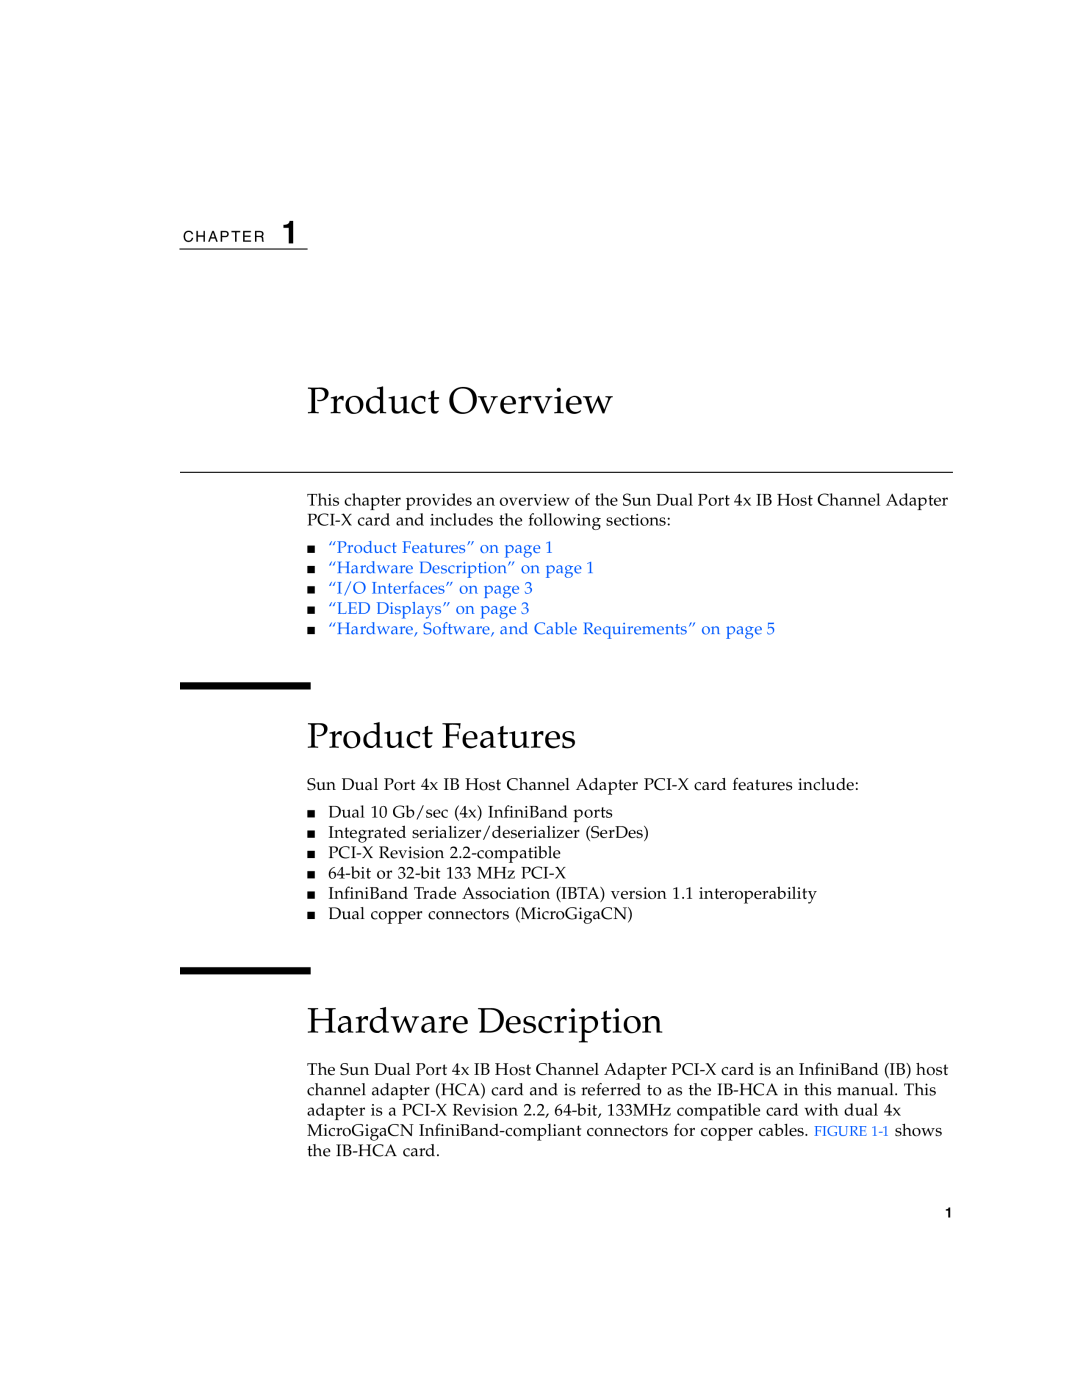 Sun Microsystems PCI manual Product Overview, Product Features, Hardware Description 